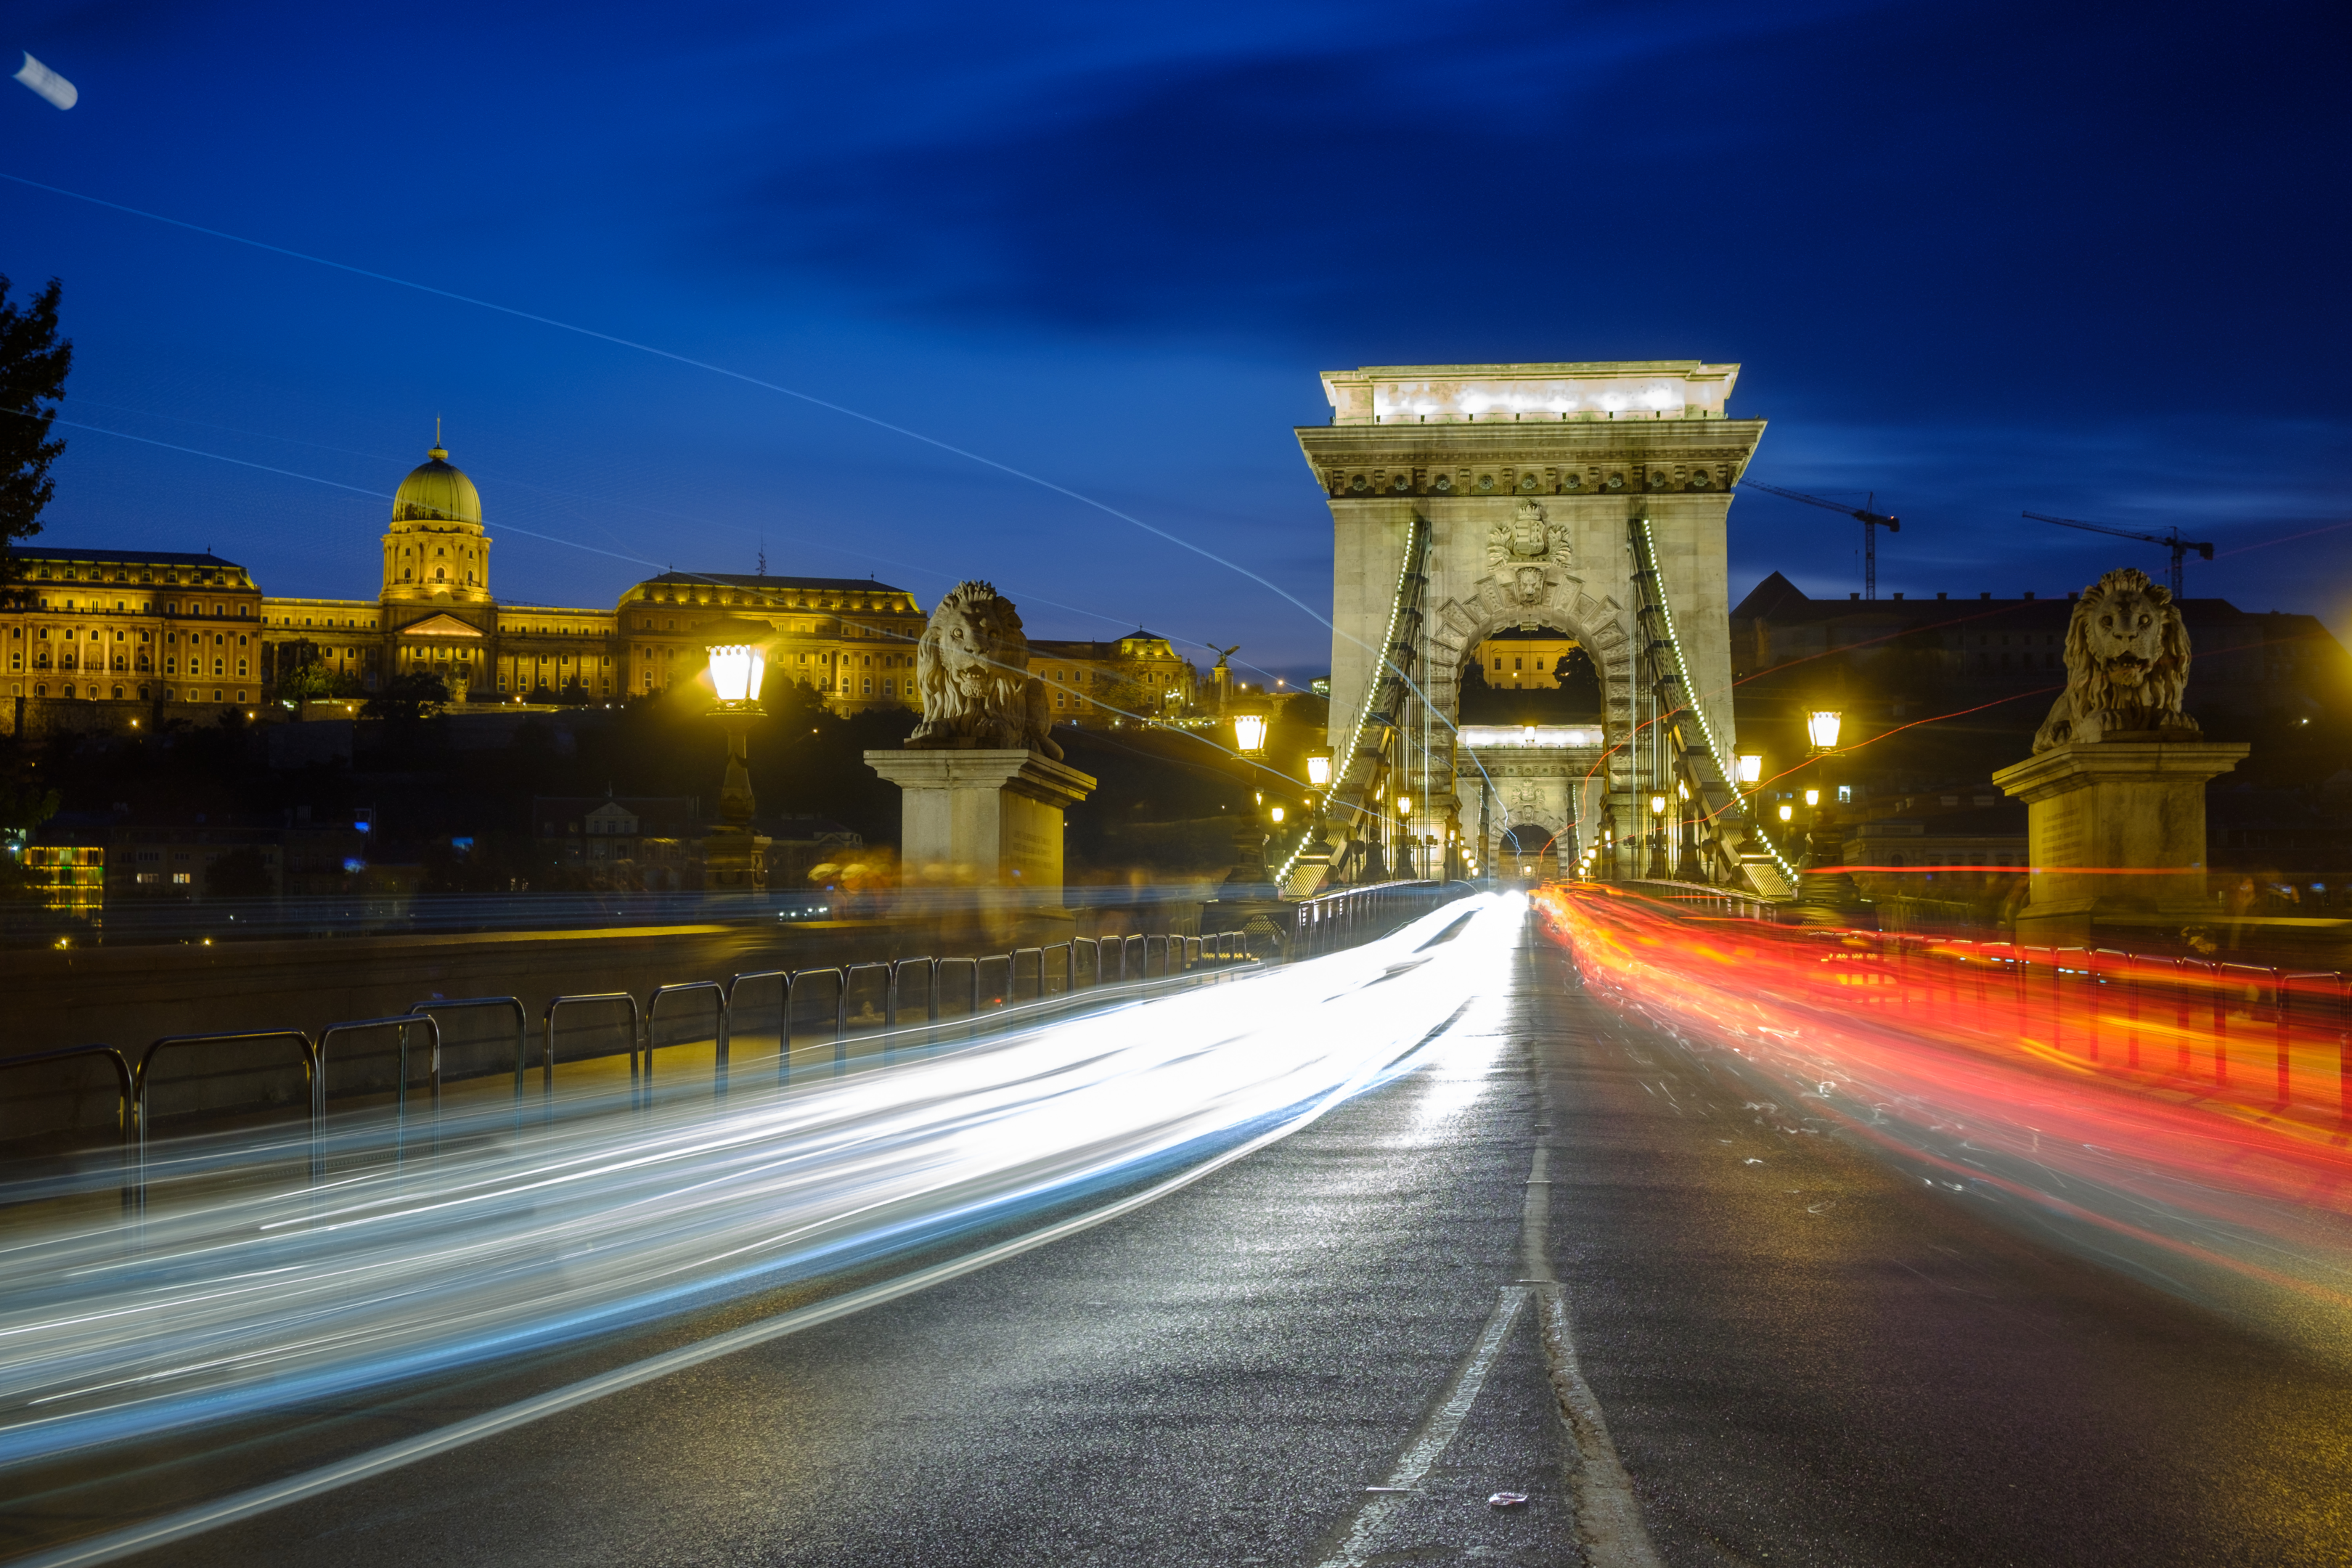 Light trails on the Chain Bridge, Budapest using a slow shutter speed. By Jason Row Photography